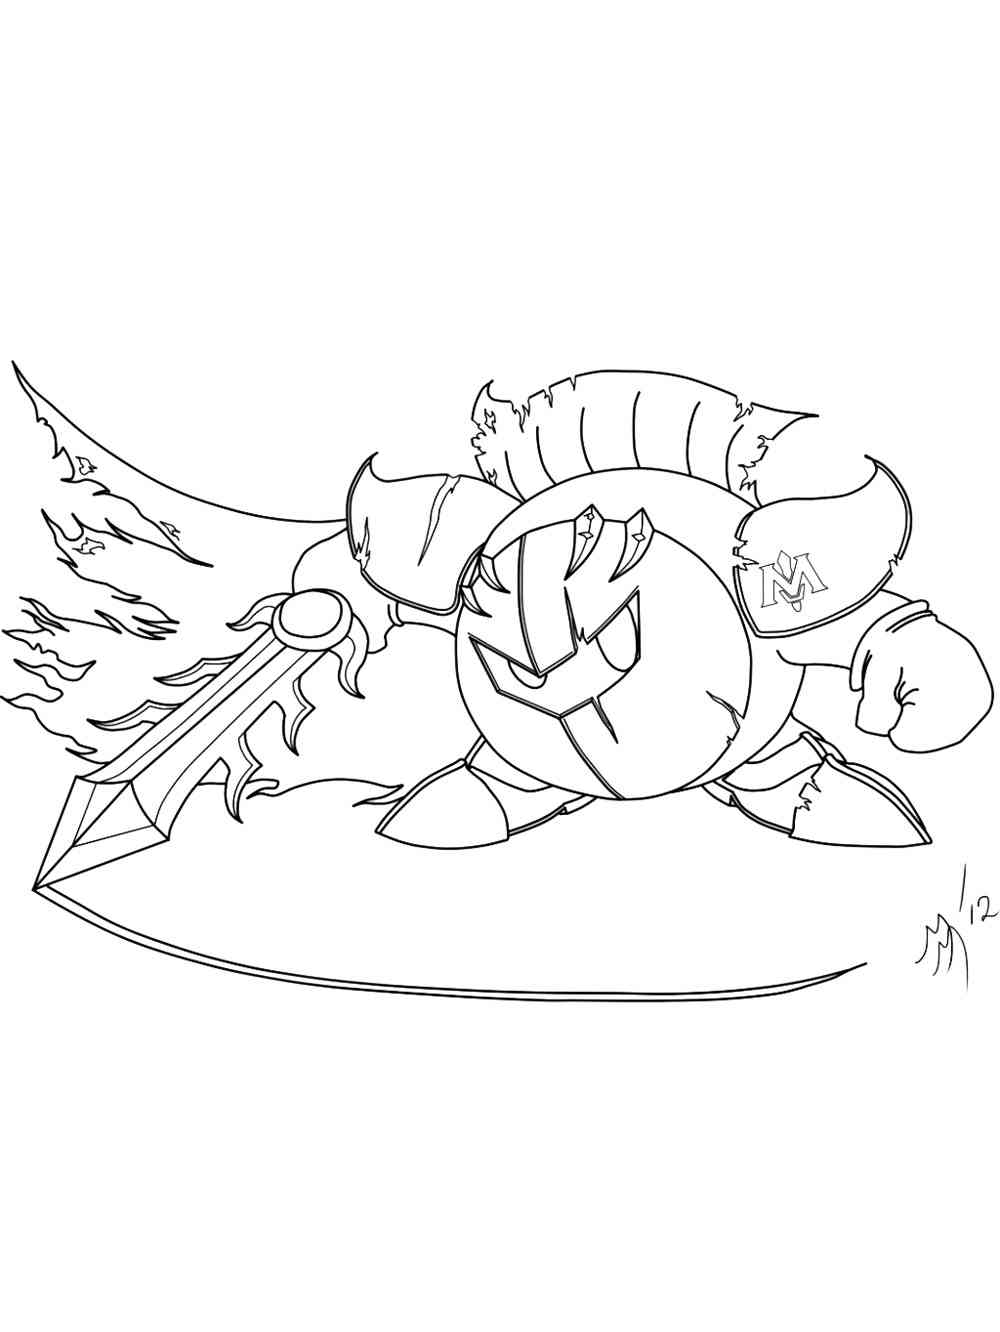 Meta Knight 7 coloring page